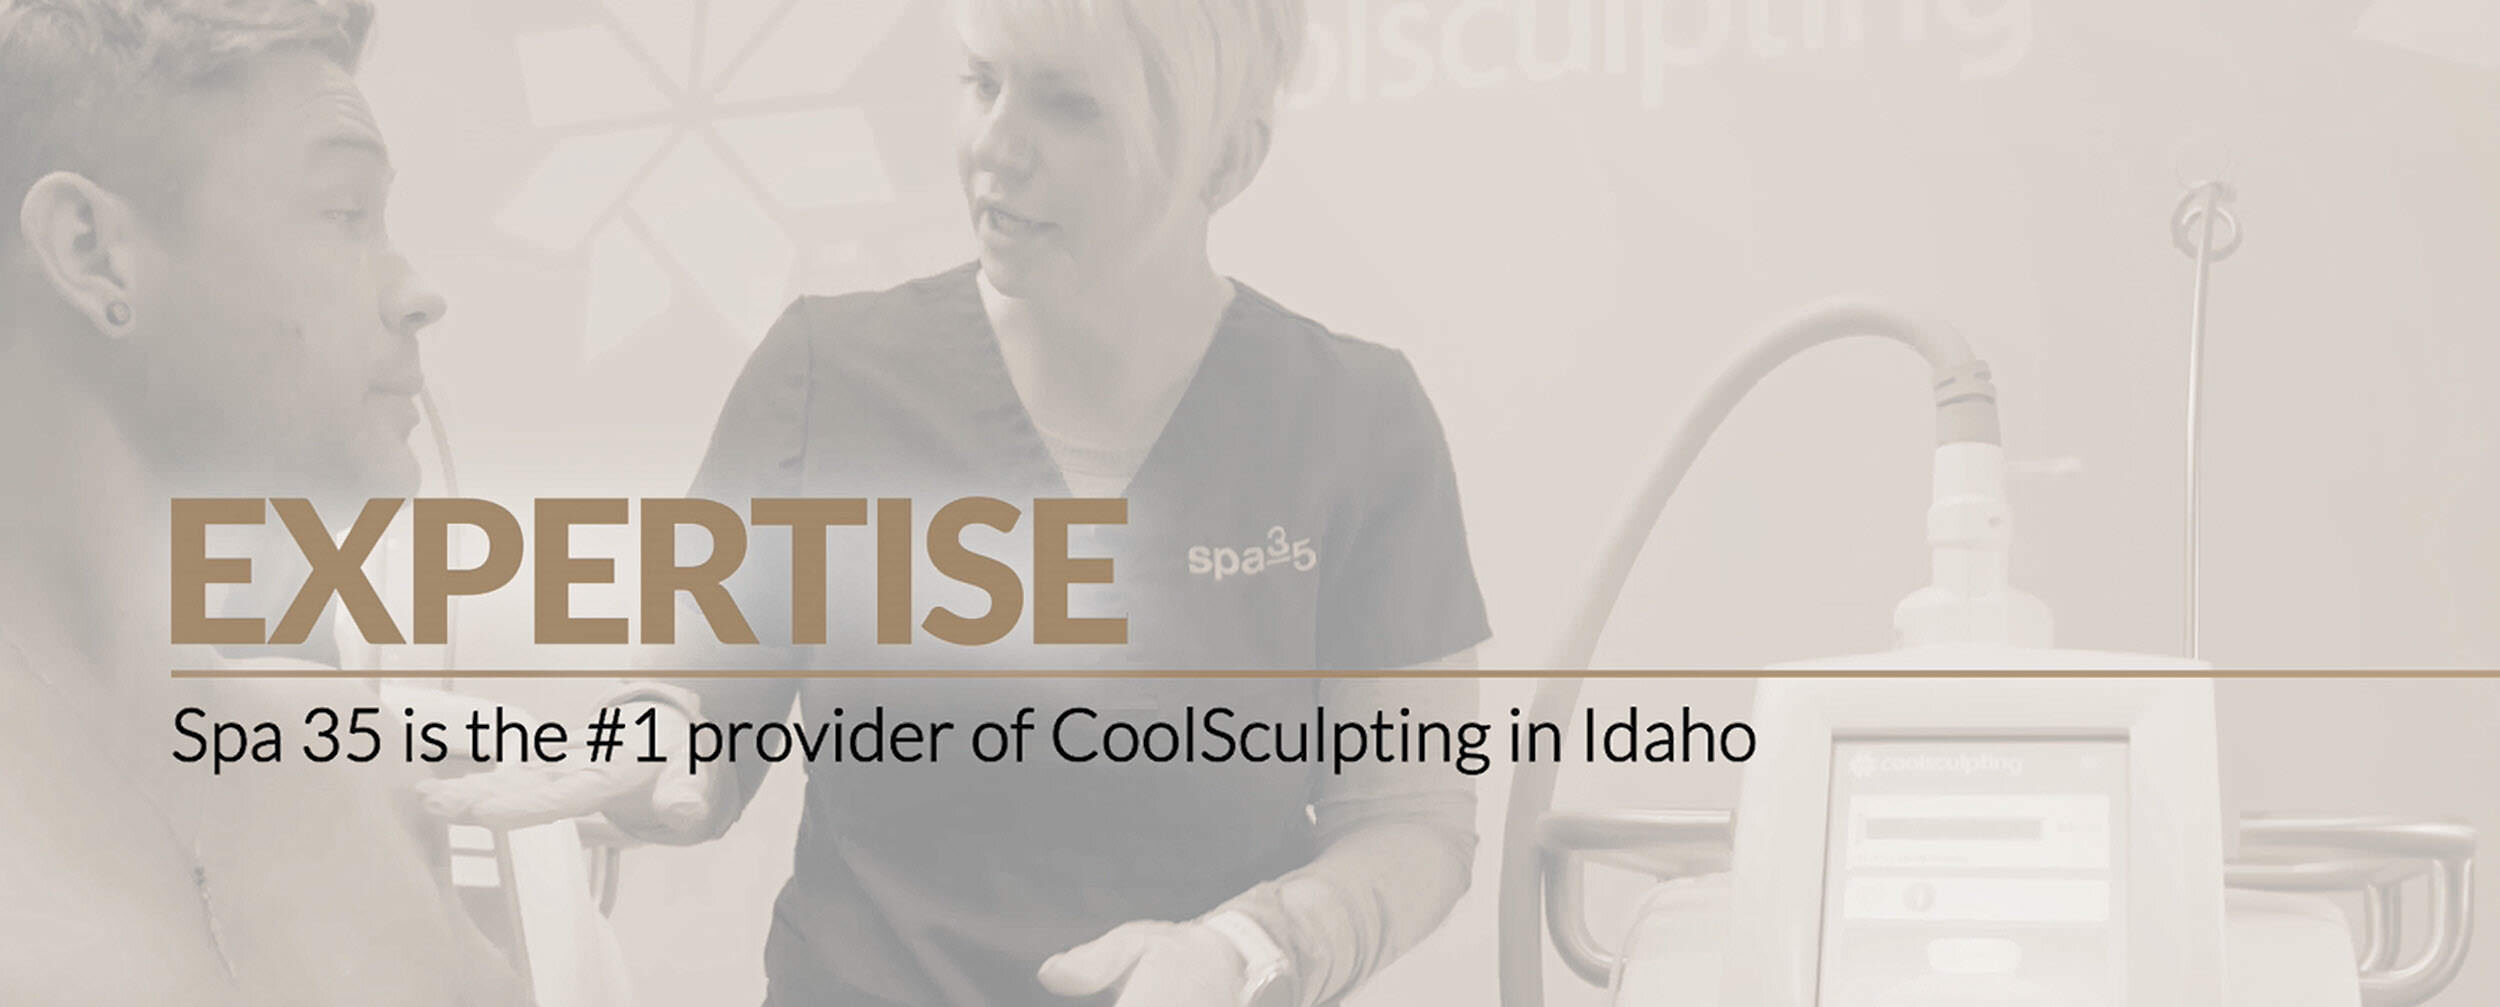 Master Certified in CoolSculpting, Consultants to Candela Medical - Worldwide leaders in cosmetic lasers